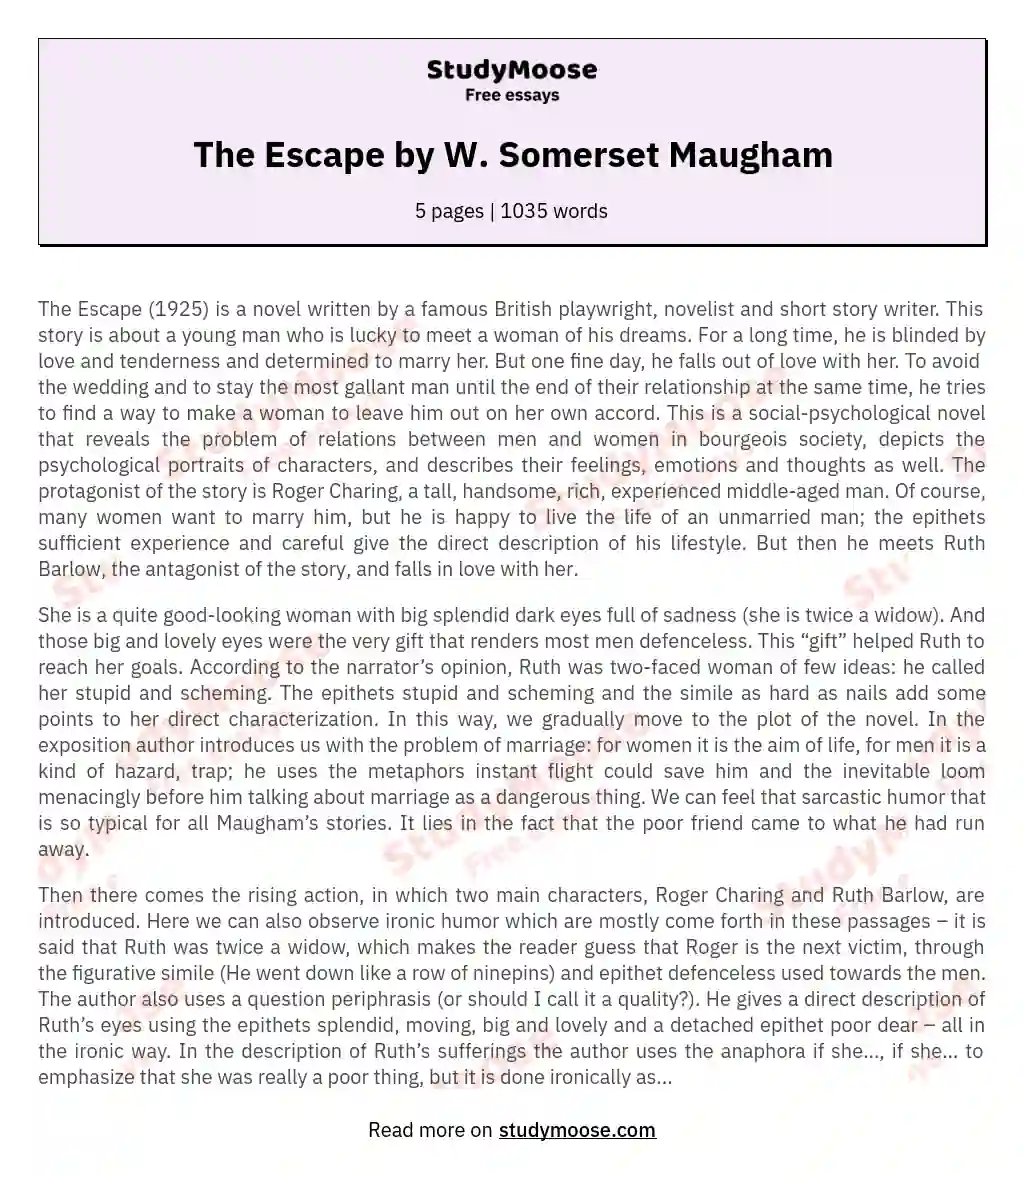 The Escape by W. Somerset Maugham essay